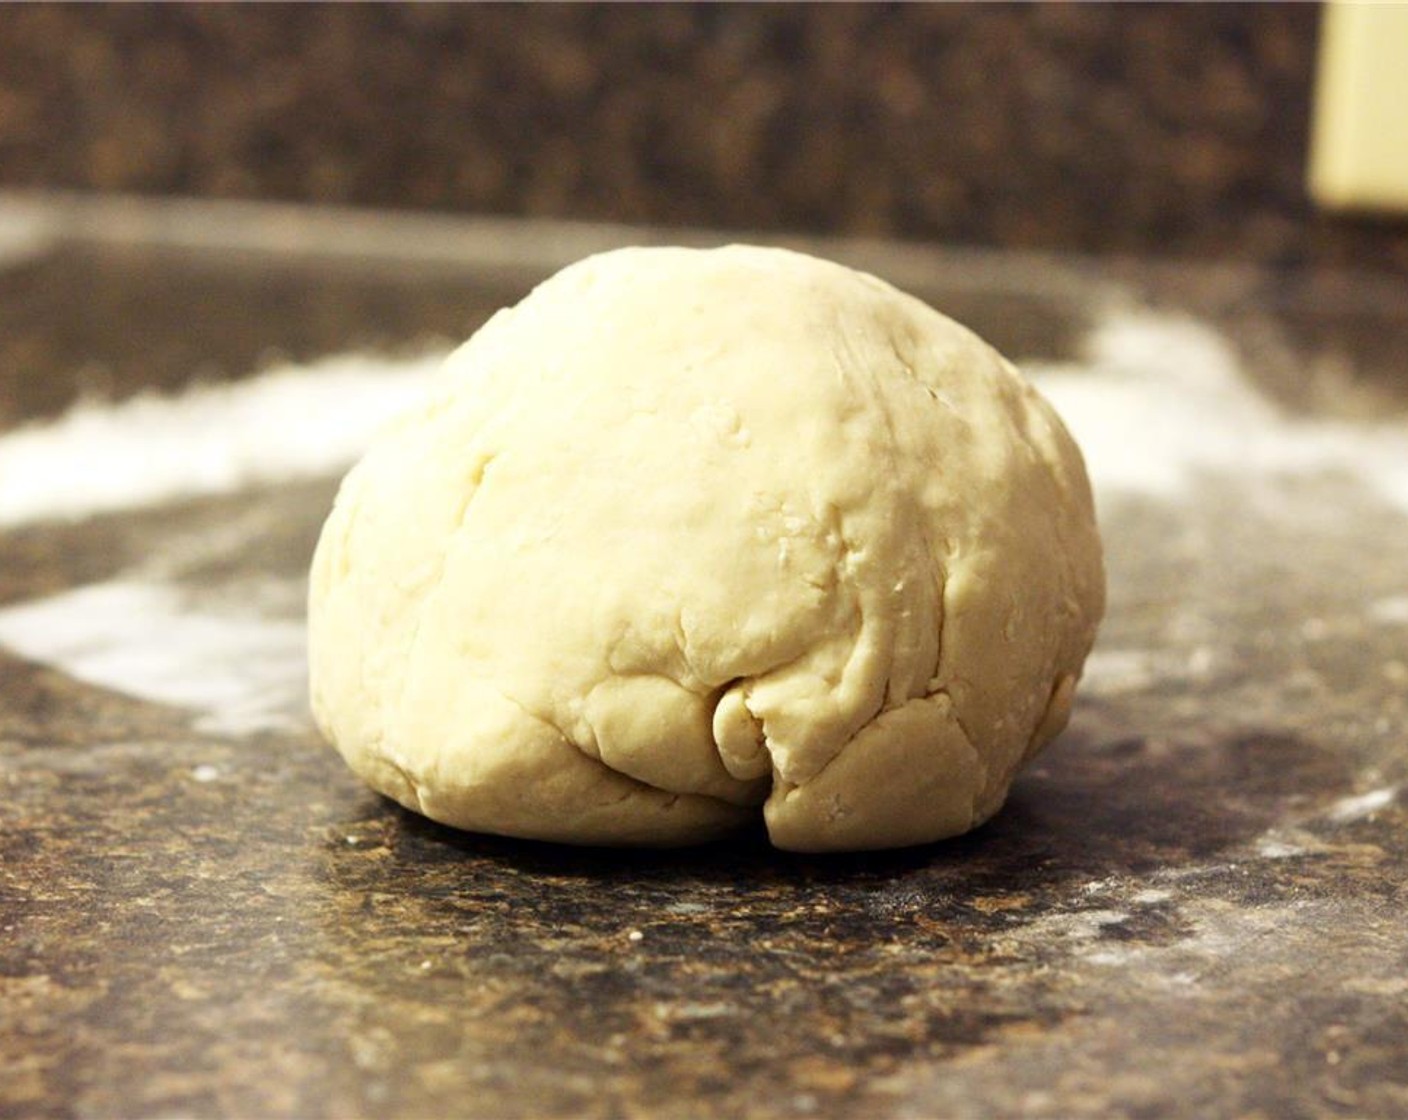 step 4 Once dough has rested, remove it from the bowl and knead for 5-10 minutes until dough is fairly smooth.